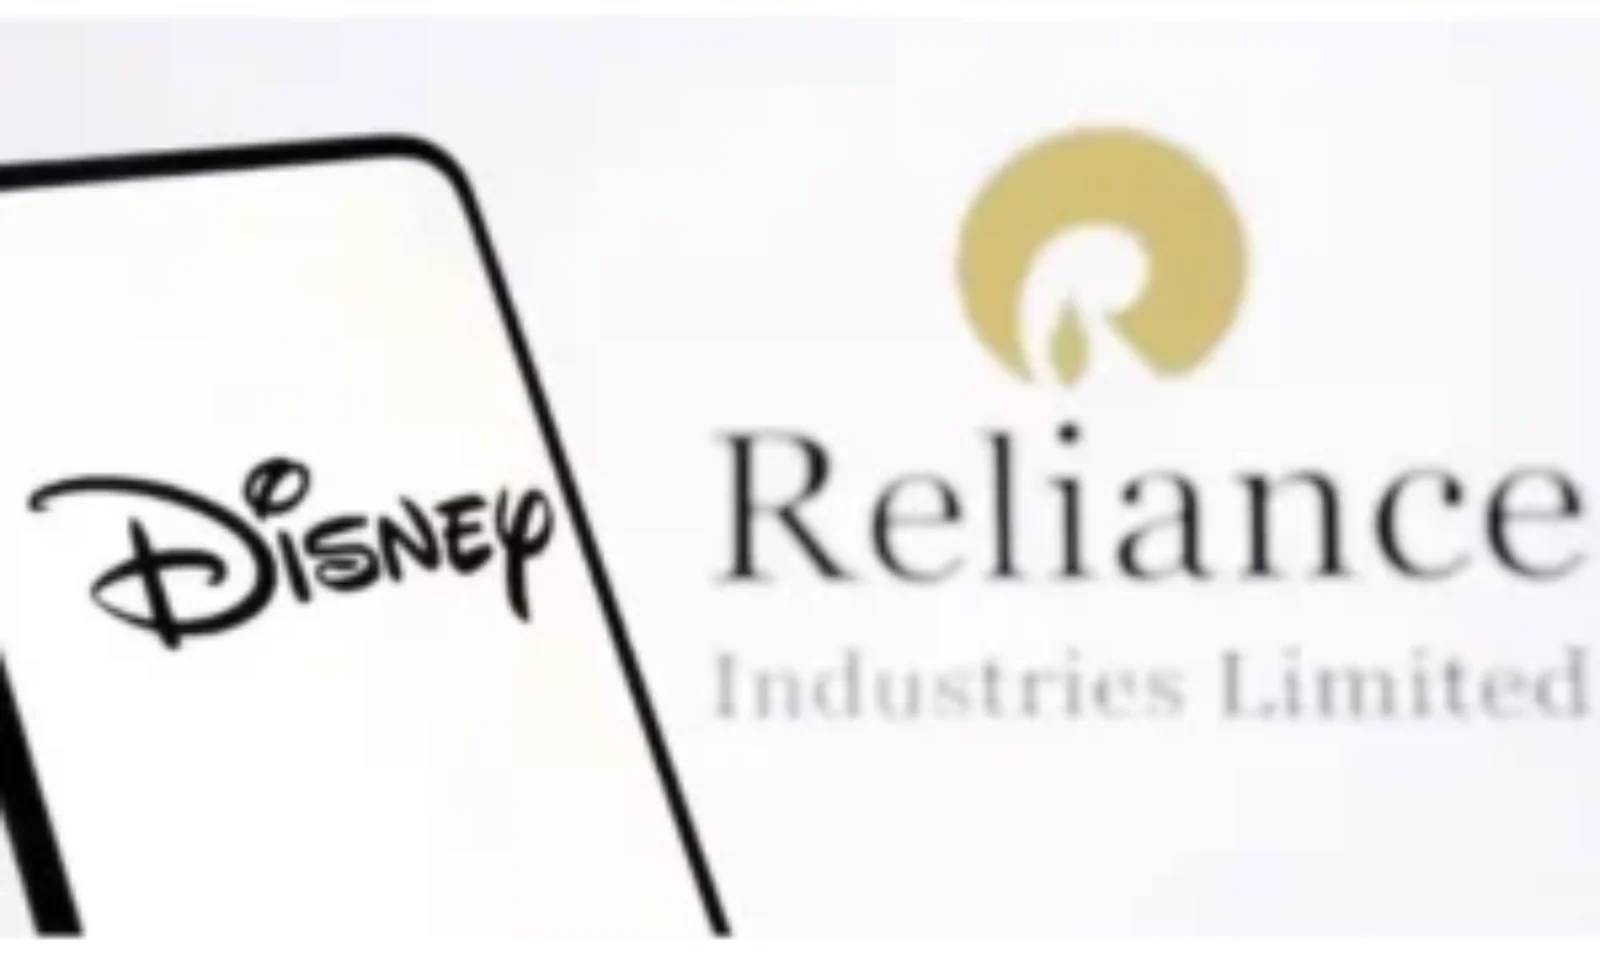 Viacom18, Reliance, Disney, RIL, Mukesh Ambani, Disney Reliance merger, Reliance to merge with Disney, Disney Hotstar, Tata Play, Walt Disney, Sony Zee Merger, Reliance Industries, entertainment sector, media and entertainment, Indian premier league, IPL 2024, cricket world cup, binding agreement, media business, media operations, India operations, Reliance Industries Limited, RIL, local assets, broadcast service provider, media organization, advertising, advertise, game changer, Netflix, streaming service, media assets, partnership, Zee Entertainment Enterprises, media merger